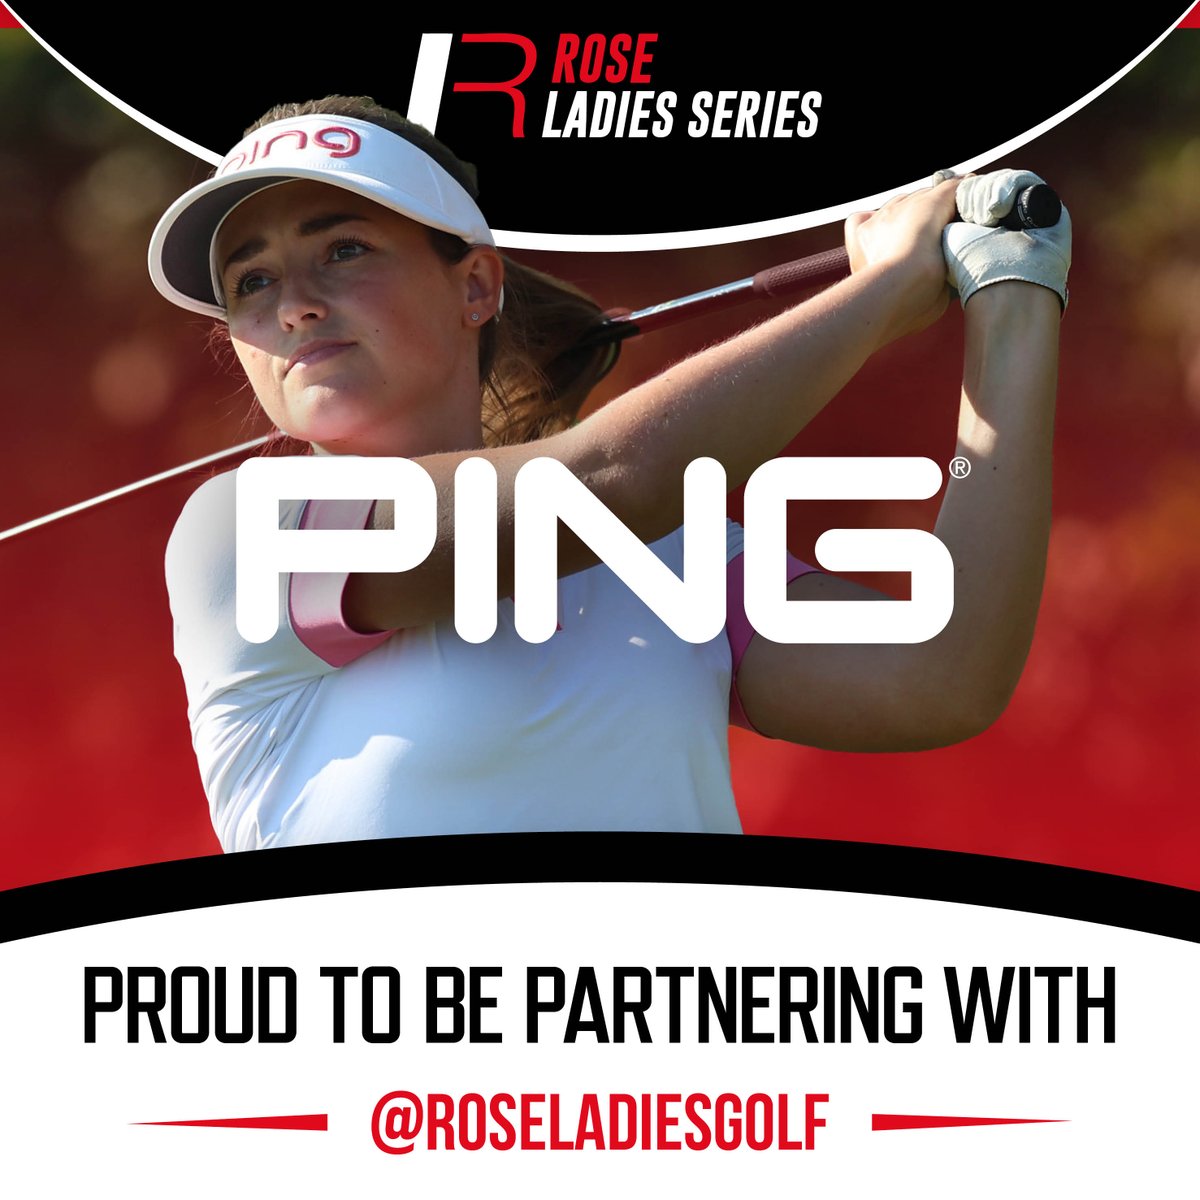 PING has been announced as the Official Clothing and Hardware Supplier of the Rose Ladies Series and Rose Ladies Open! Find out more! golfbusinessmonitor.com/?s=PING 🏌️‍♀️💯👏 #ping #pinggolf #golfapparel #golfequipment #golfsponsorship #roseladiesseries #roseladiesopen #golfbusinessmonitor